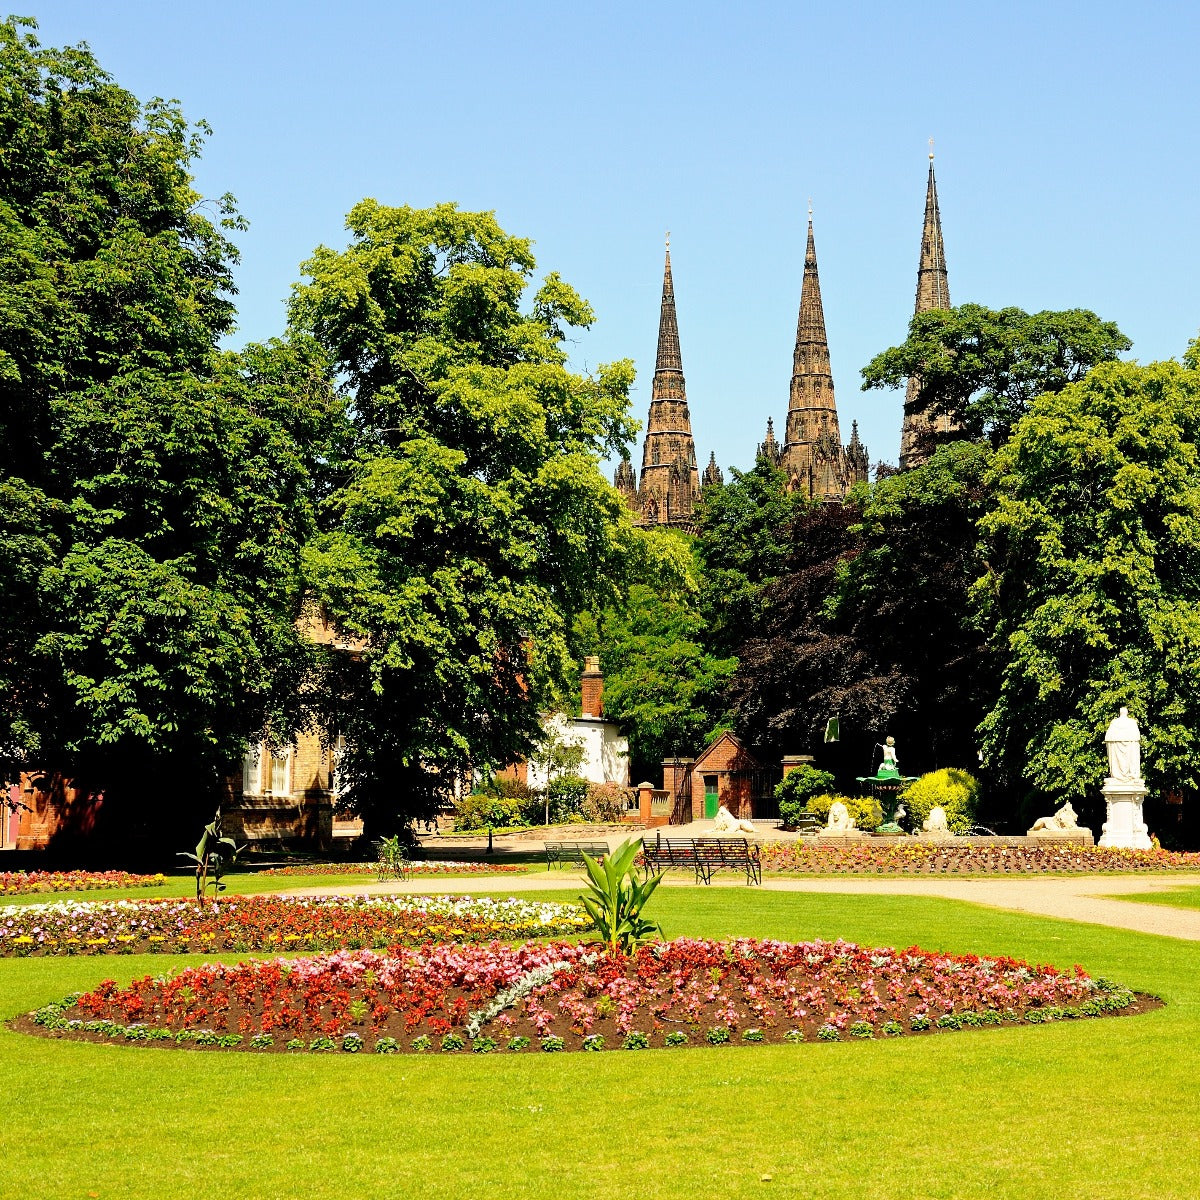 Lichfield Cathedral's three spires seen from Beacon Park